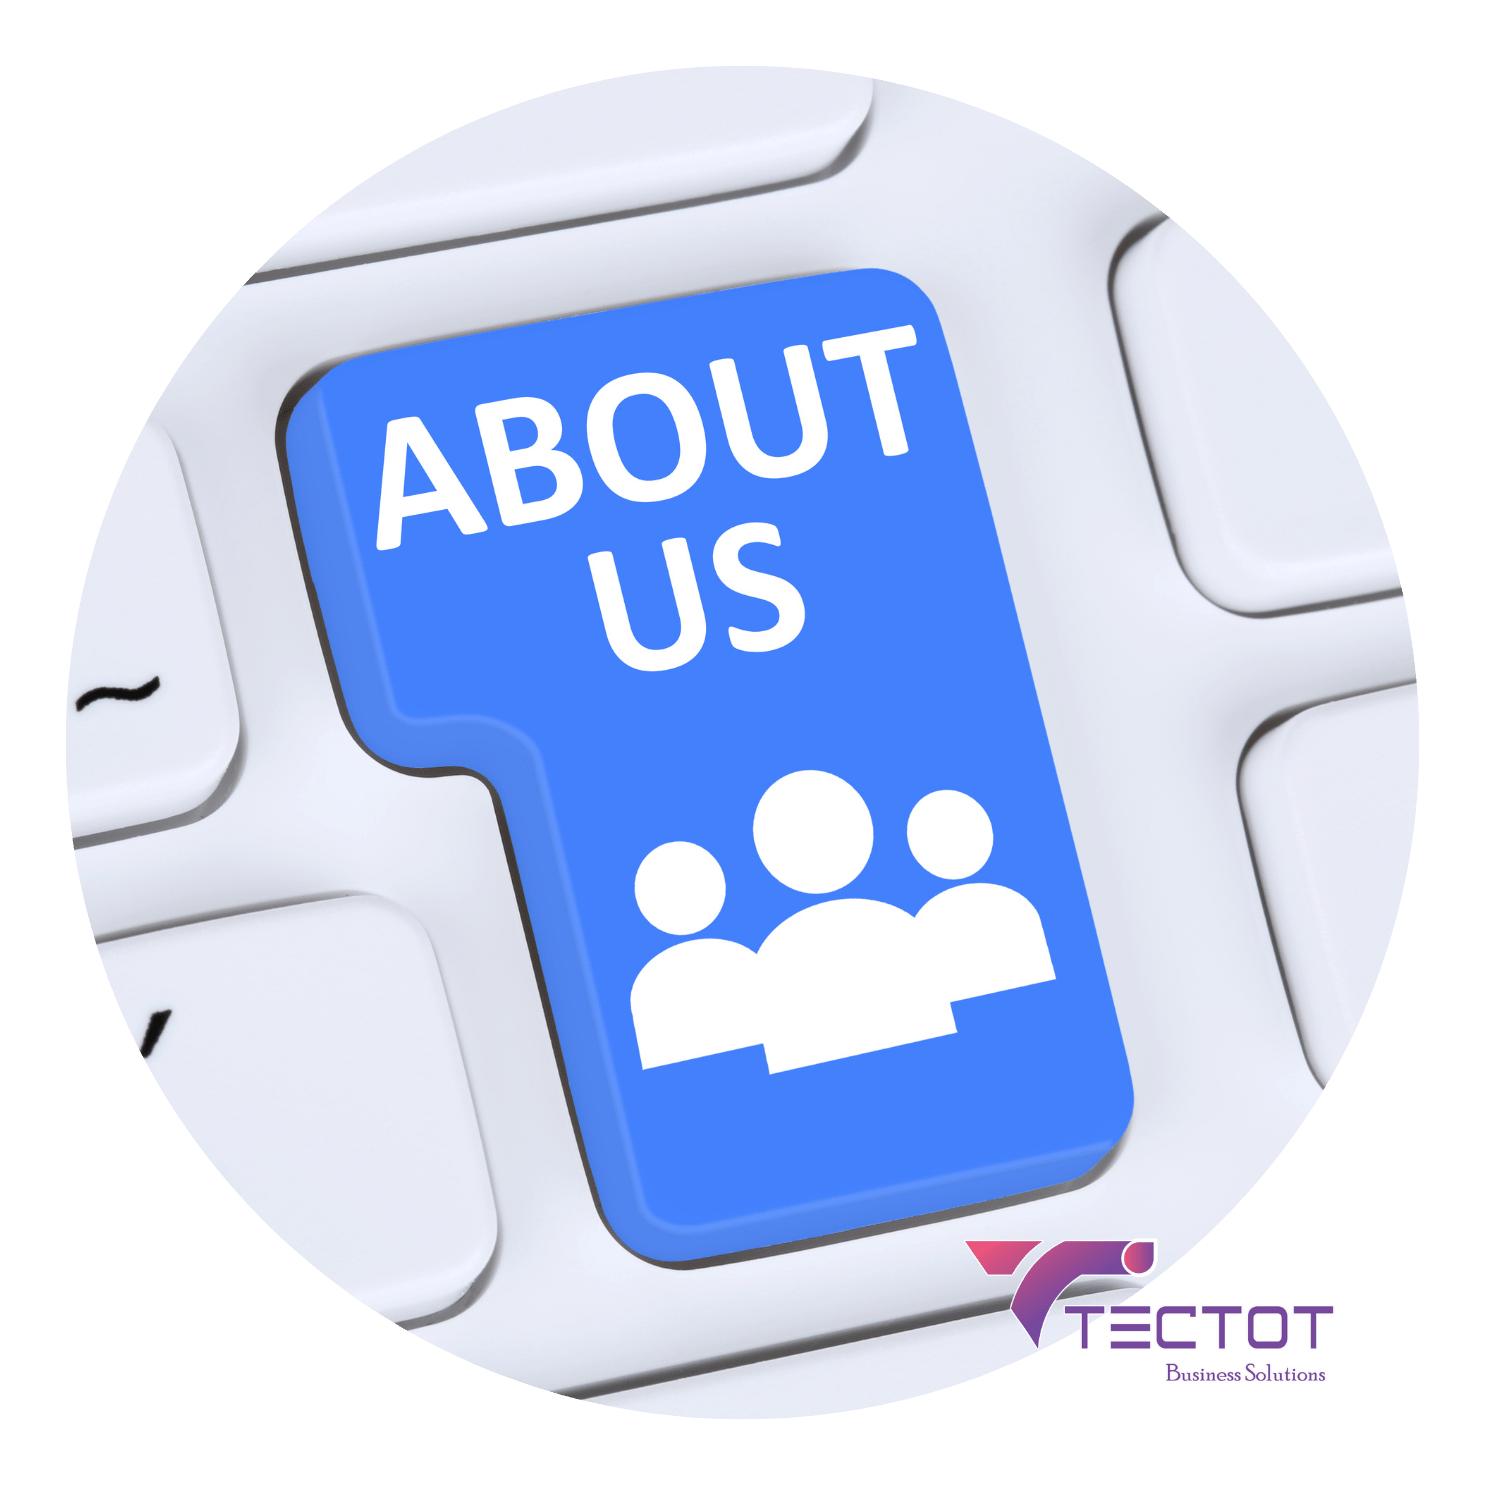 About us - Tectot Business Solutions